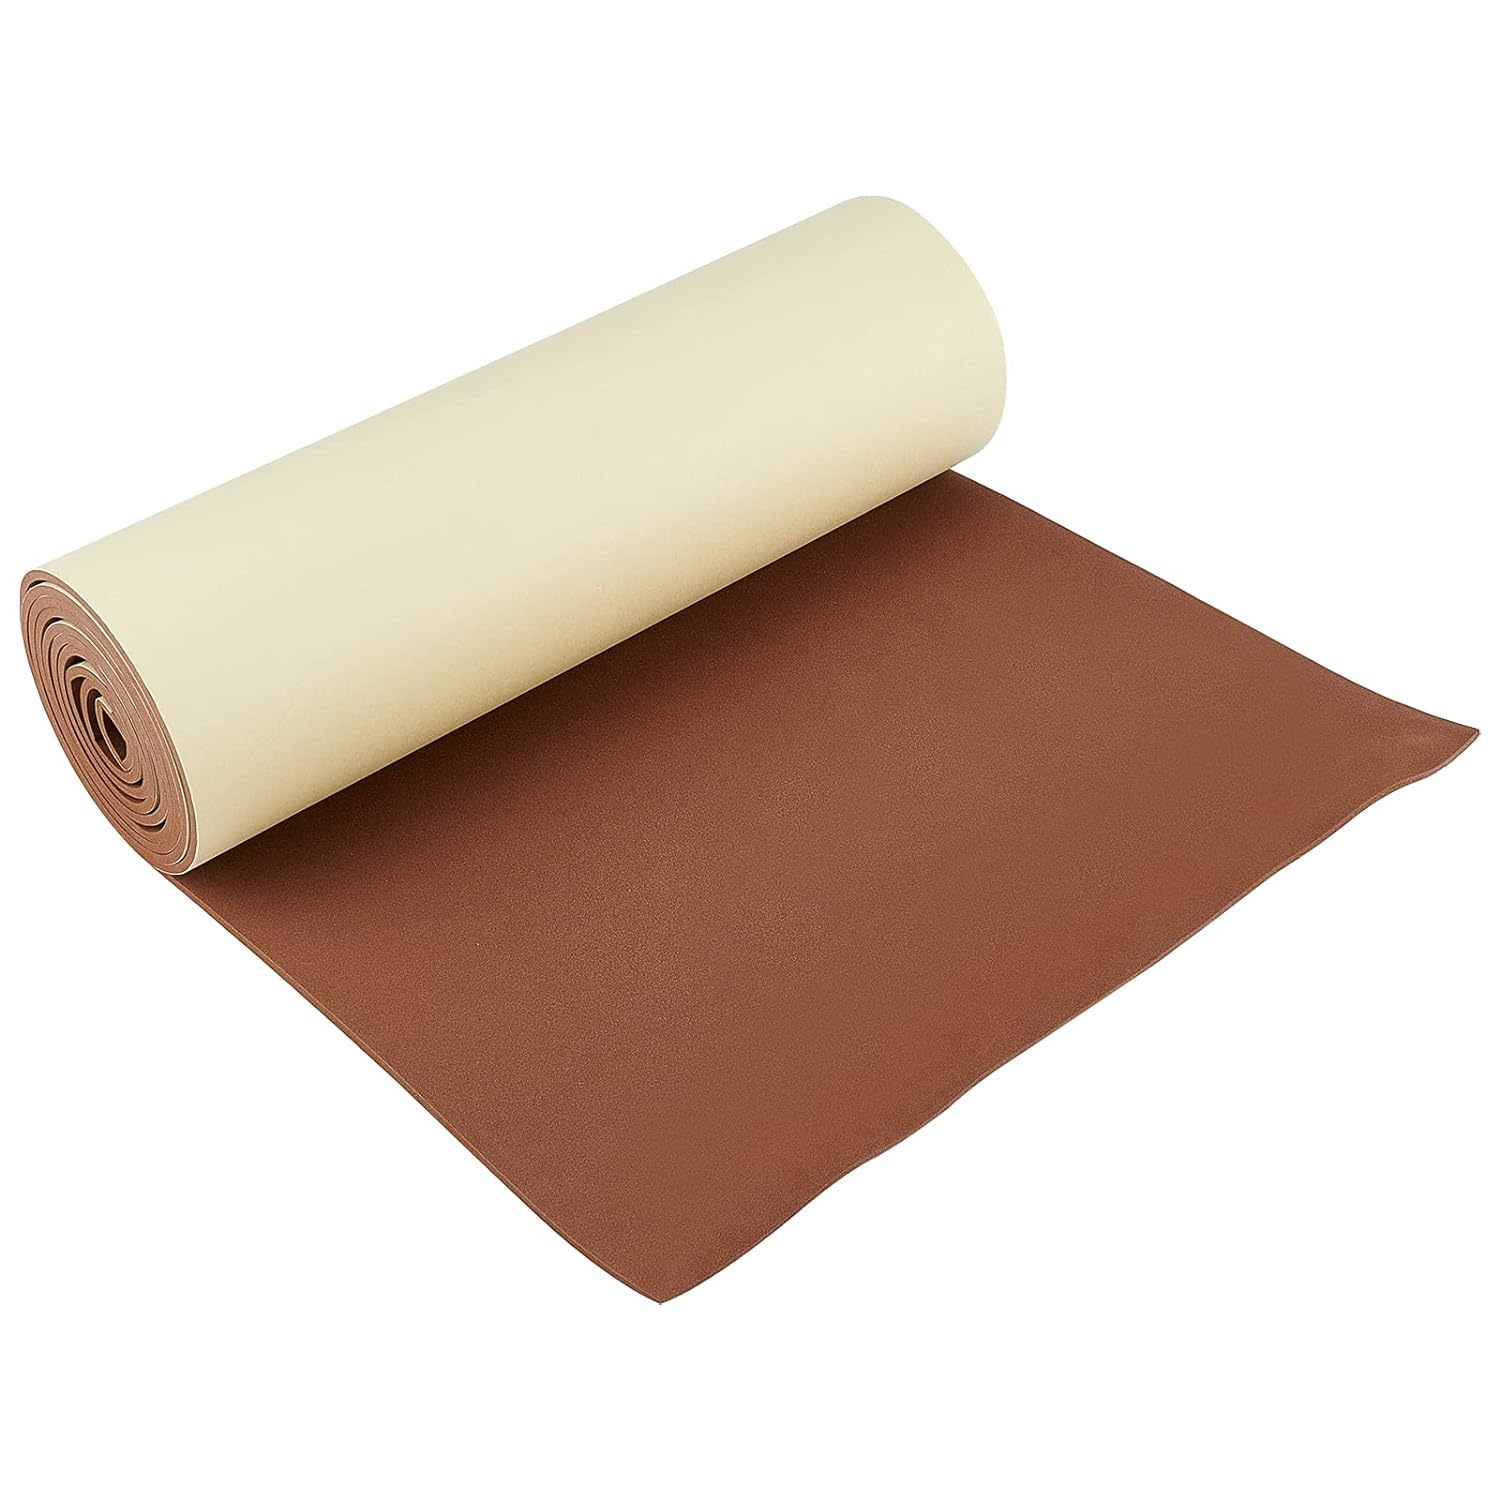 Primary image for 78.7X12 Inch Brown Self-Adhesive Eva Foam Roll, 3Mm Thick Sticky Upholstery Foam